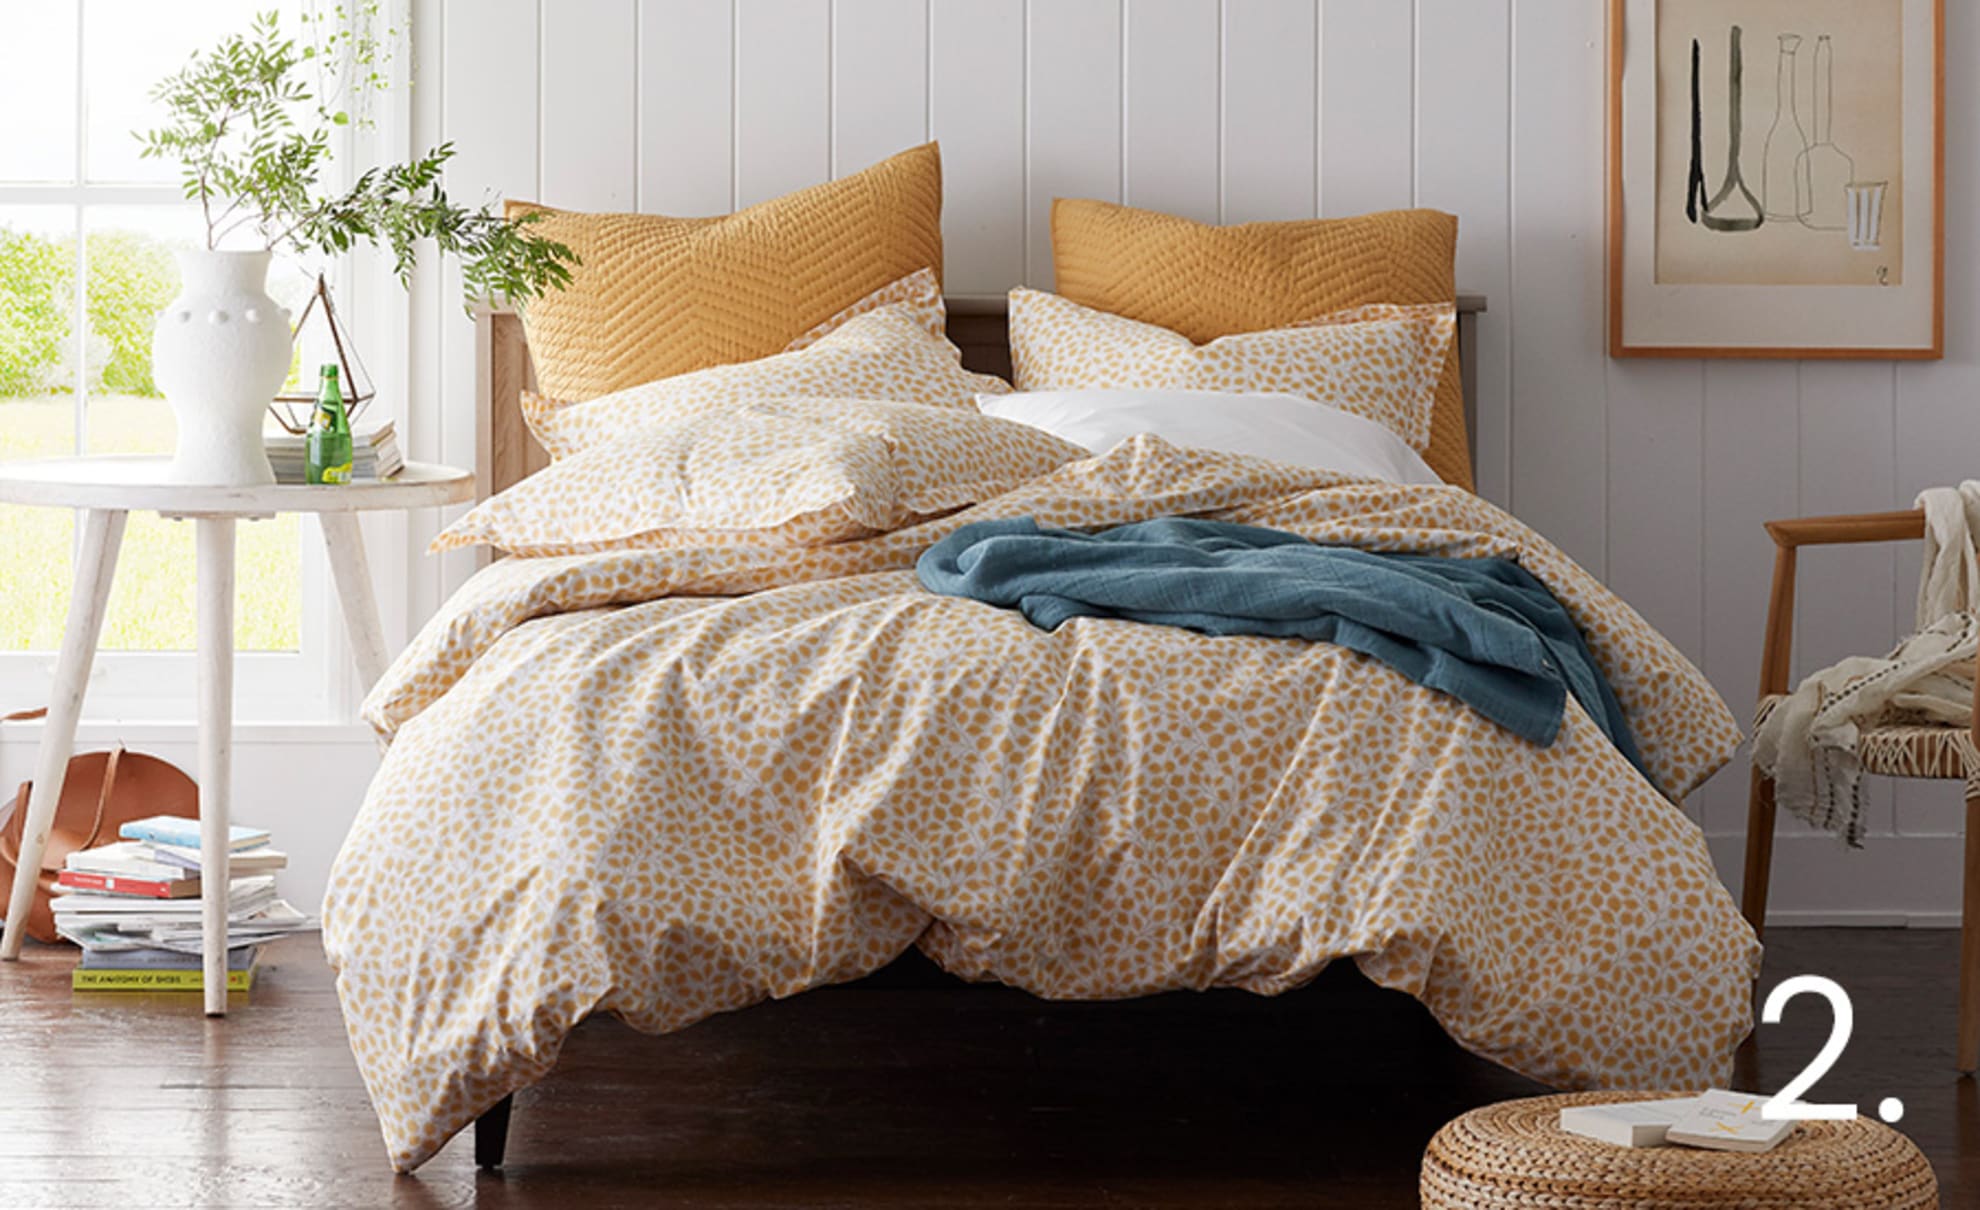 How Can I Choose The Right Bedspread To Match My Decor?